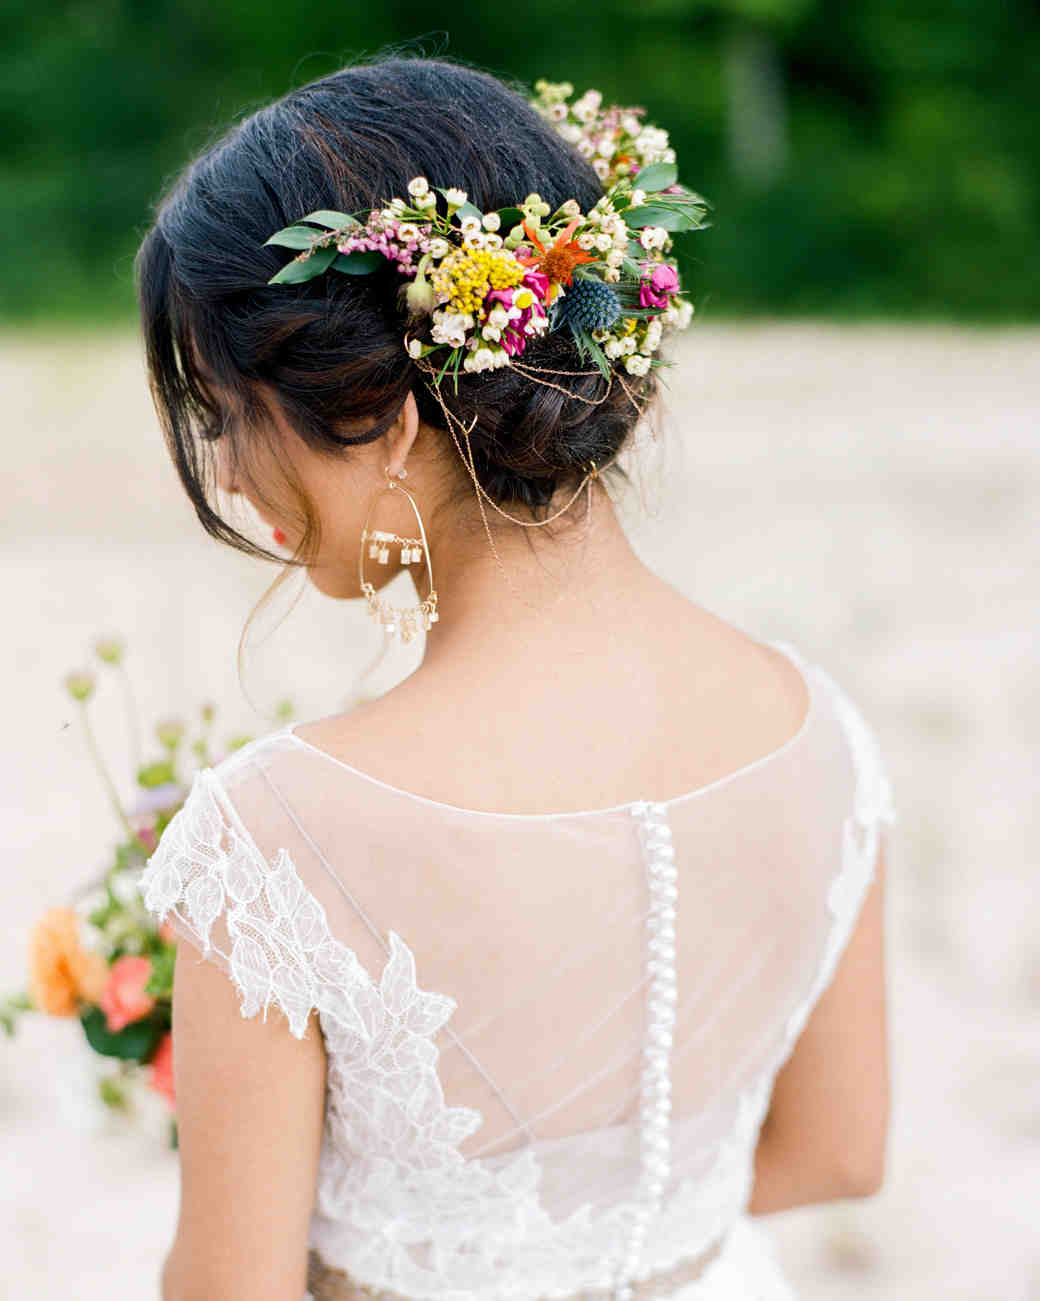 Hairstyles For Weddings.Com